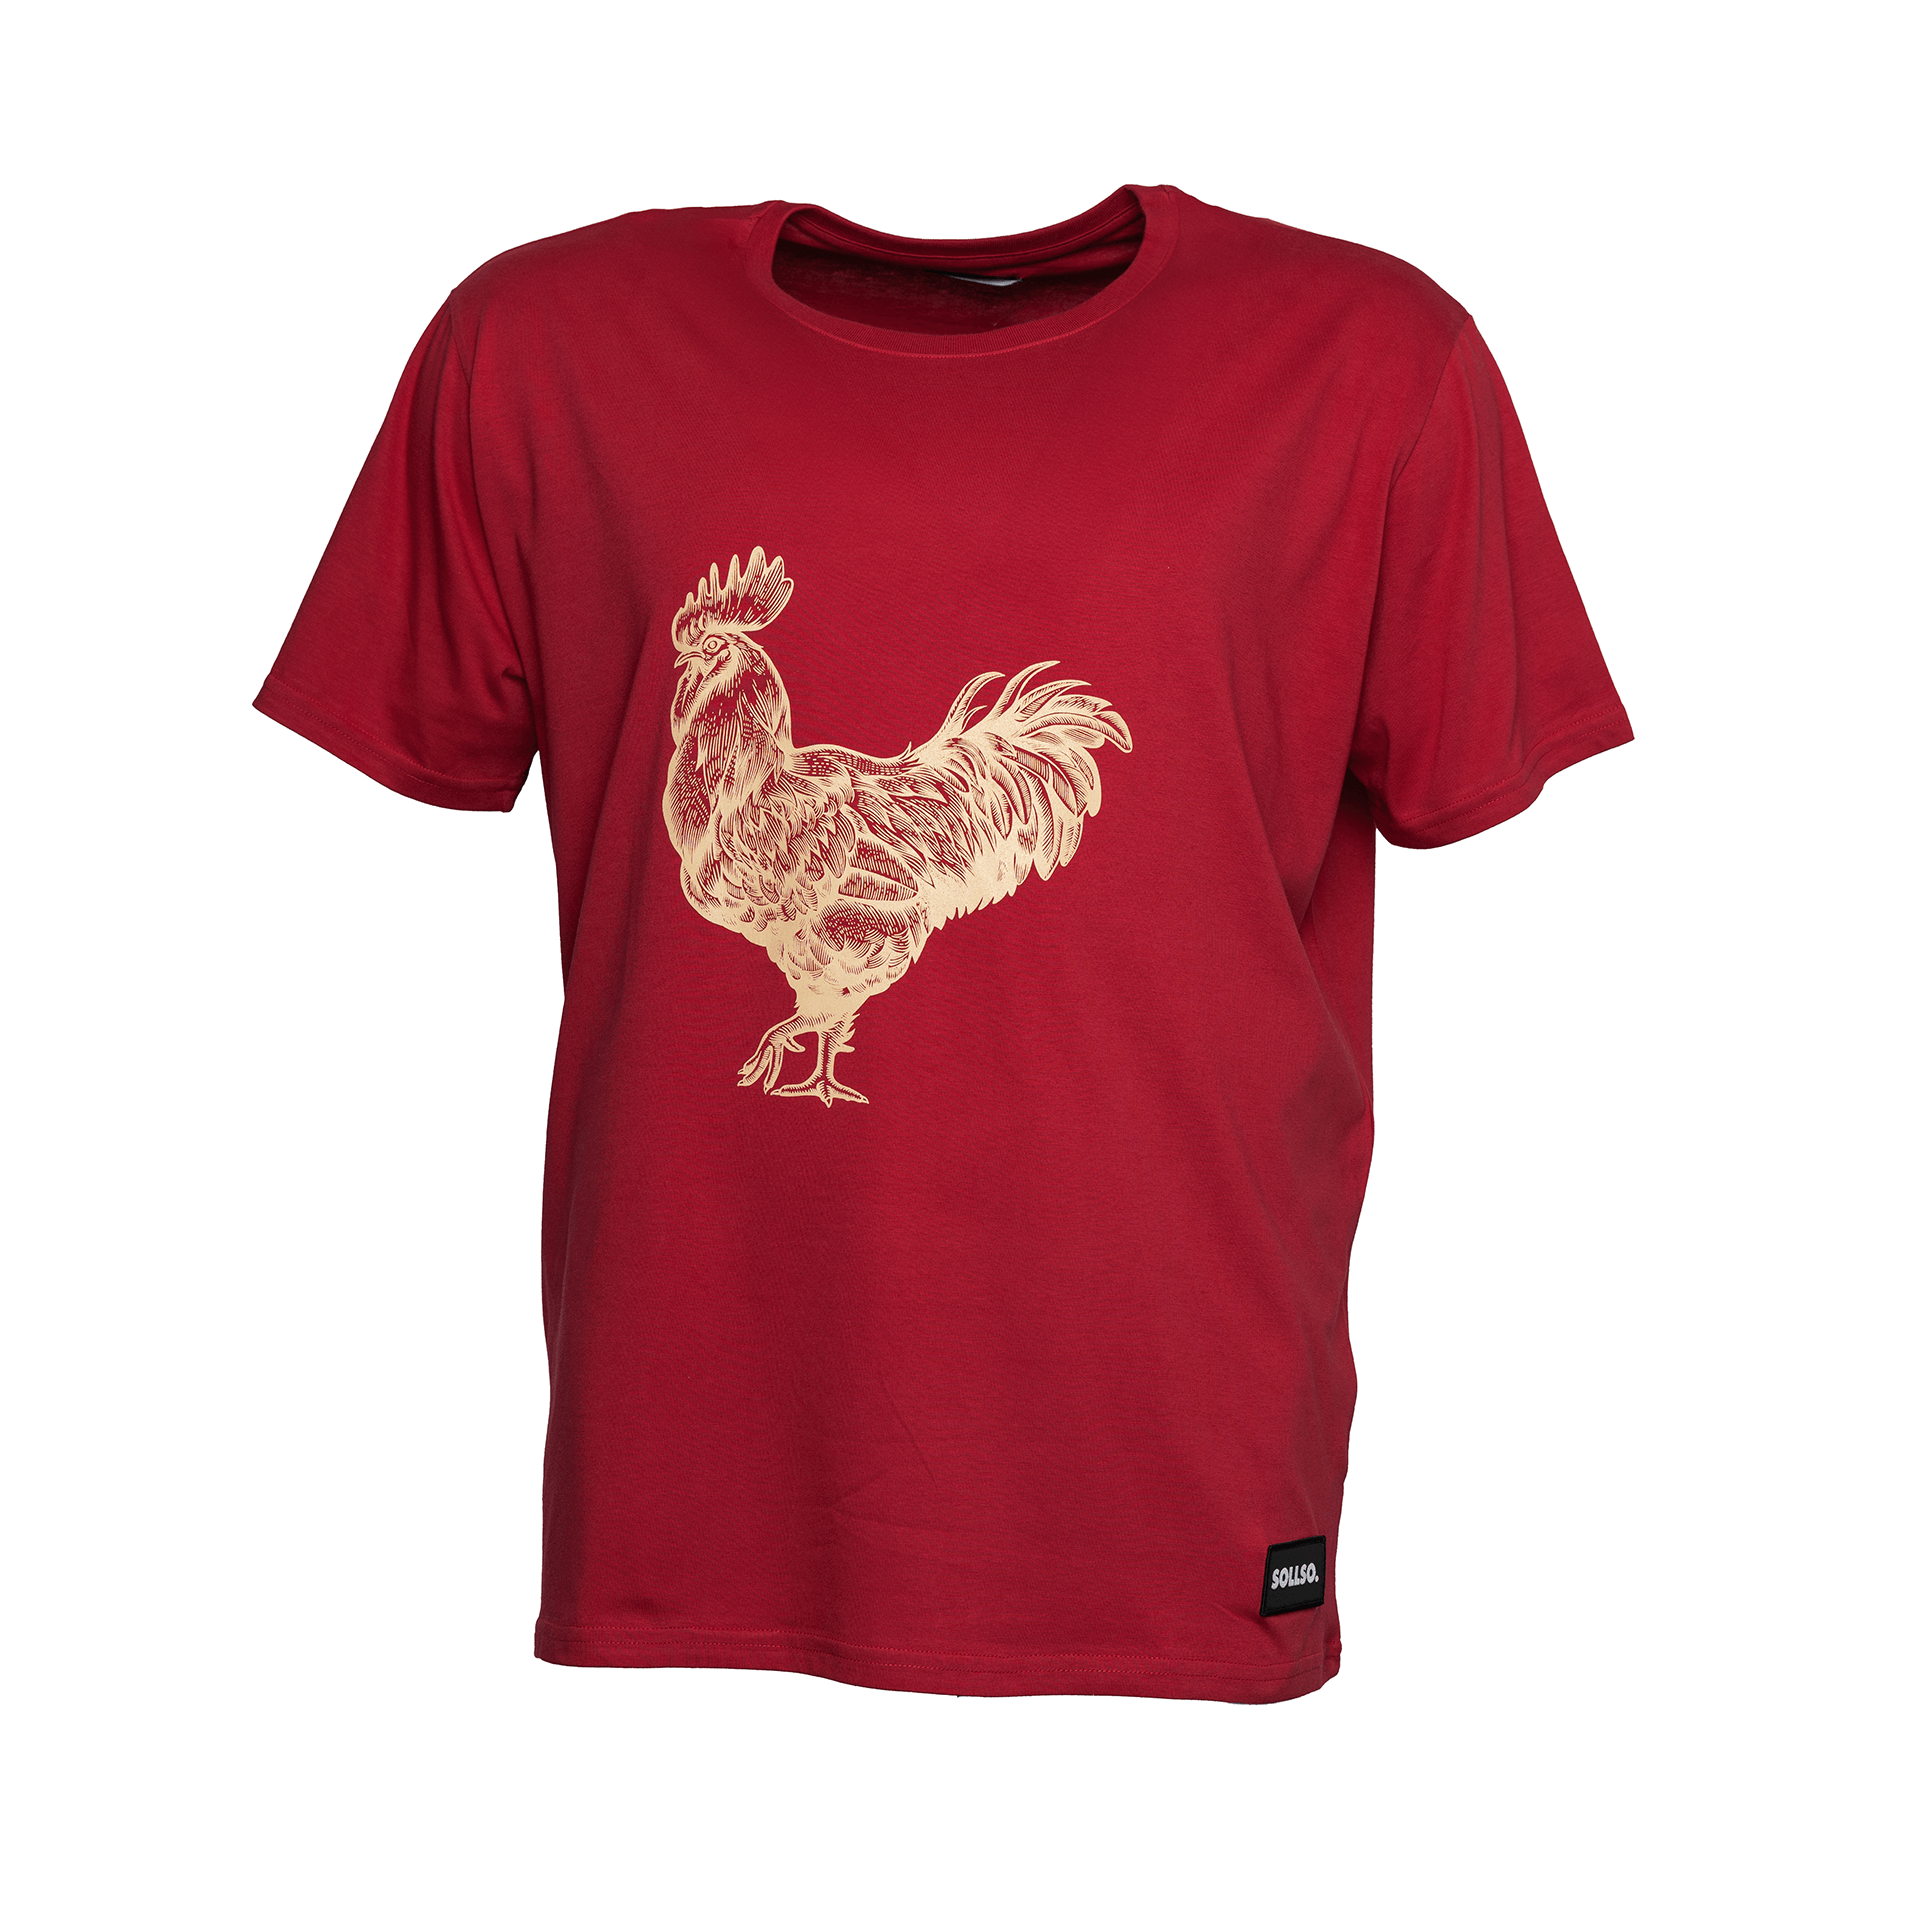 SOLLSO. T-Shirt "Rooster", Farbe Ginger Red, Größe 9XL